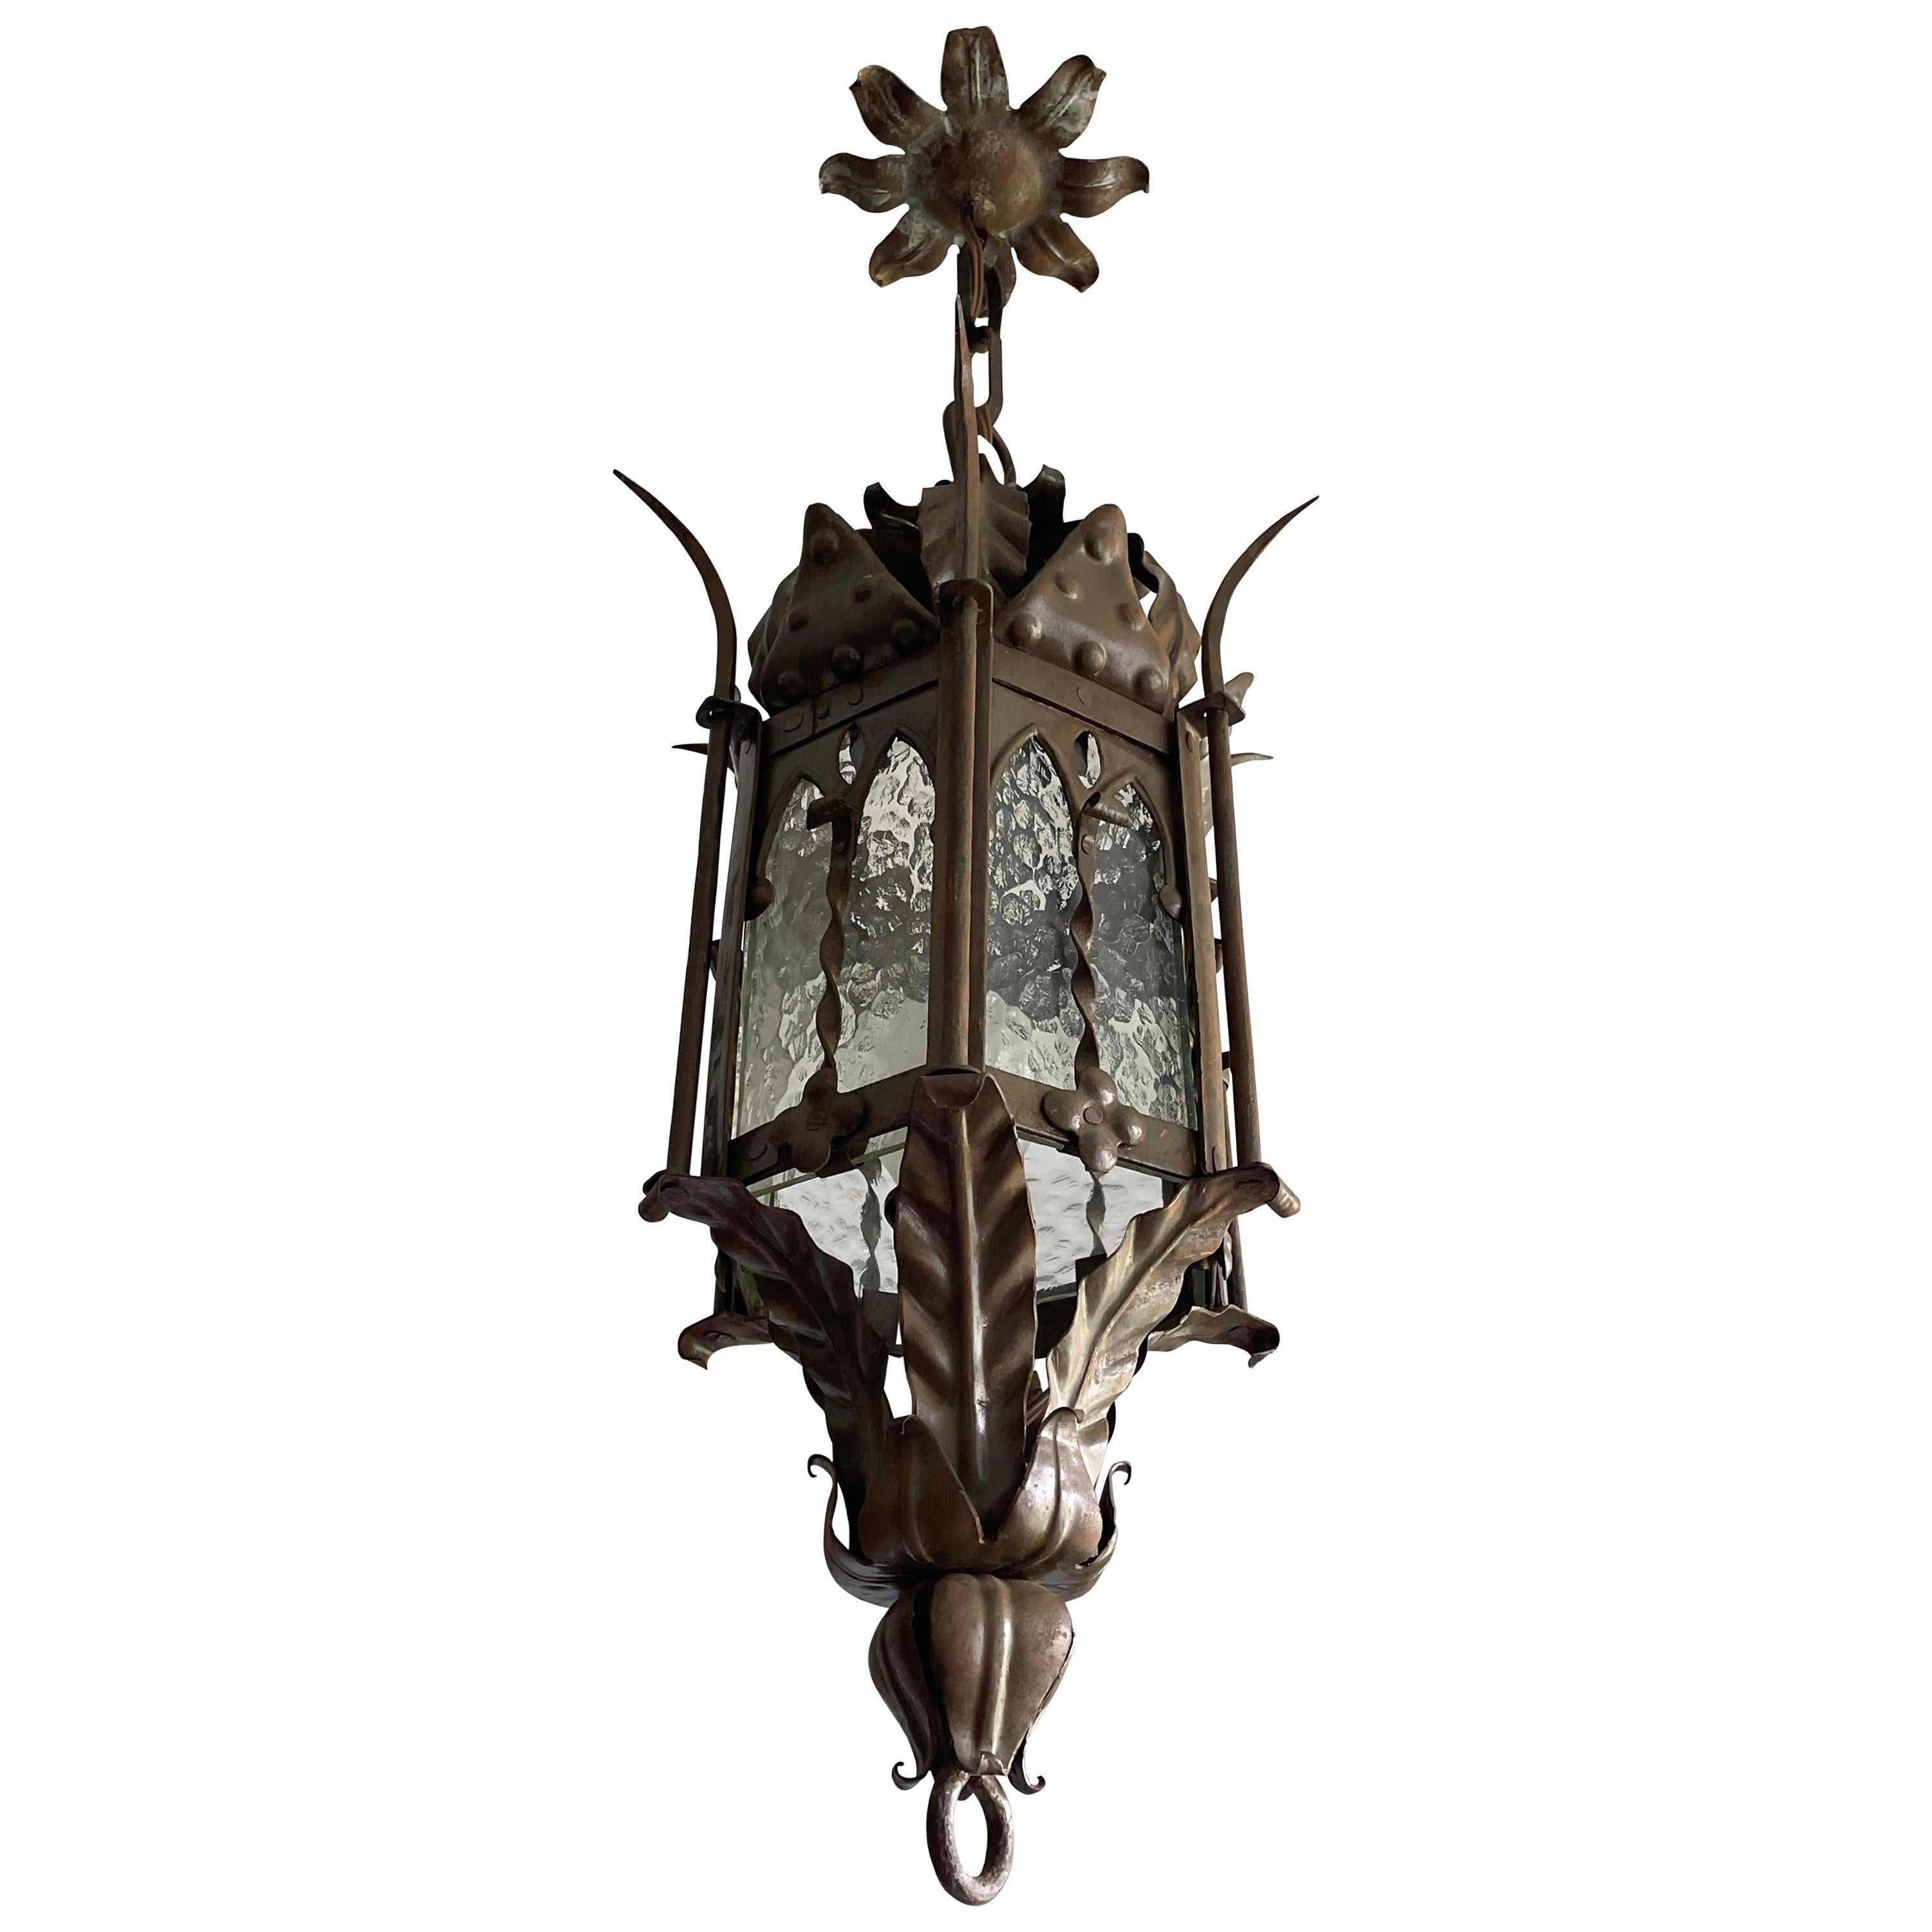 Gothic Revival Medieval Style, Good Size Wrought Iron & Cathedral Glass Lantern